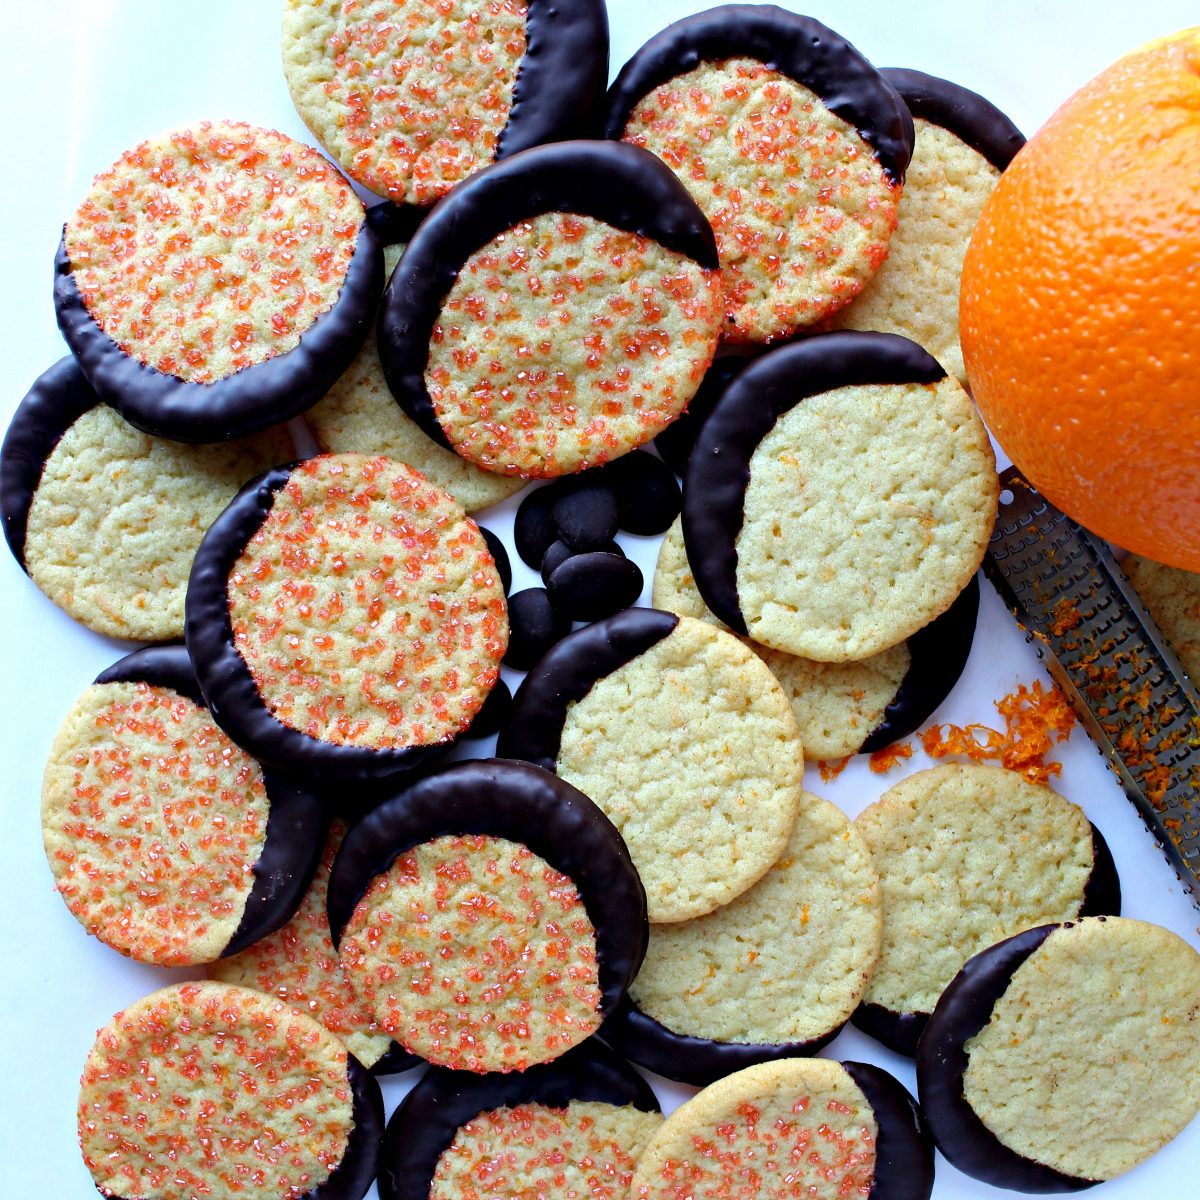 Cookies, some with orange sugar and dipped in chocolate, next to an orange and microplane zester.